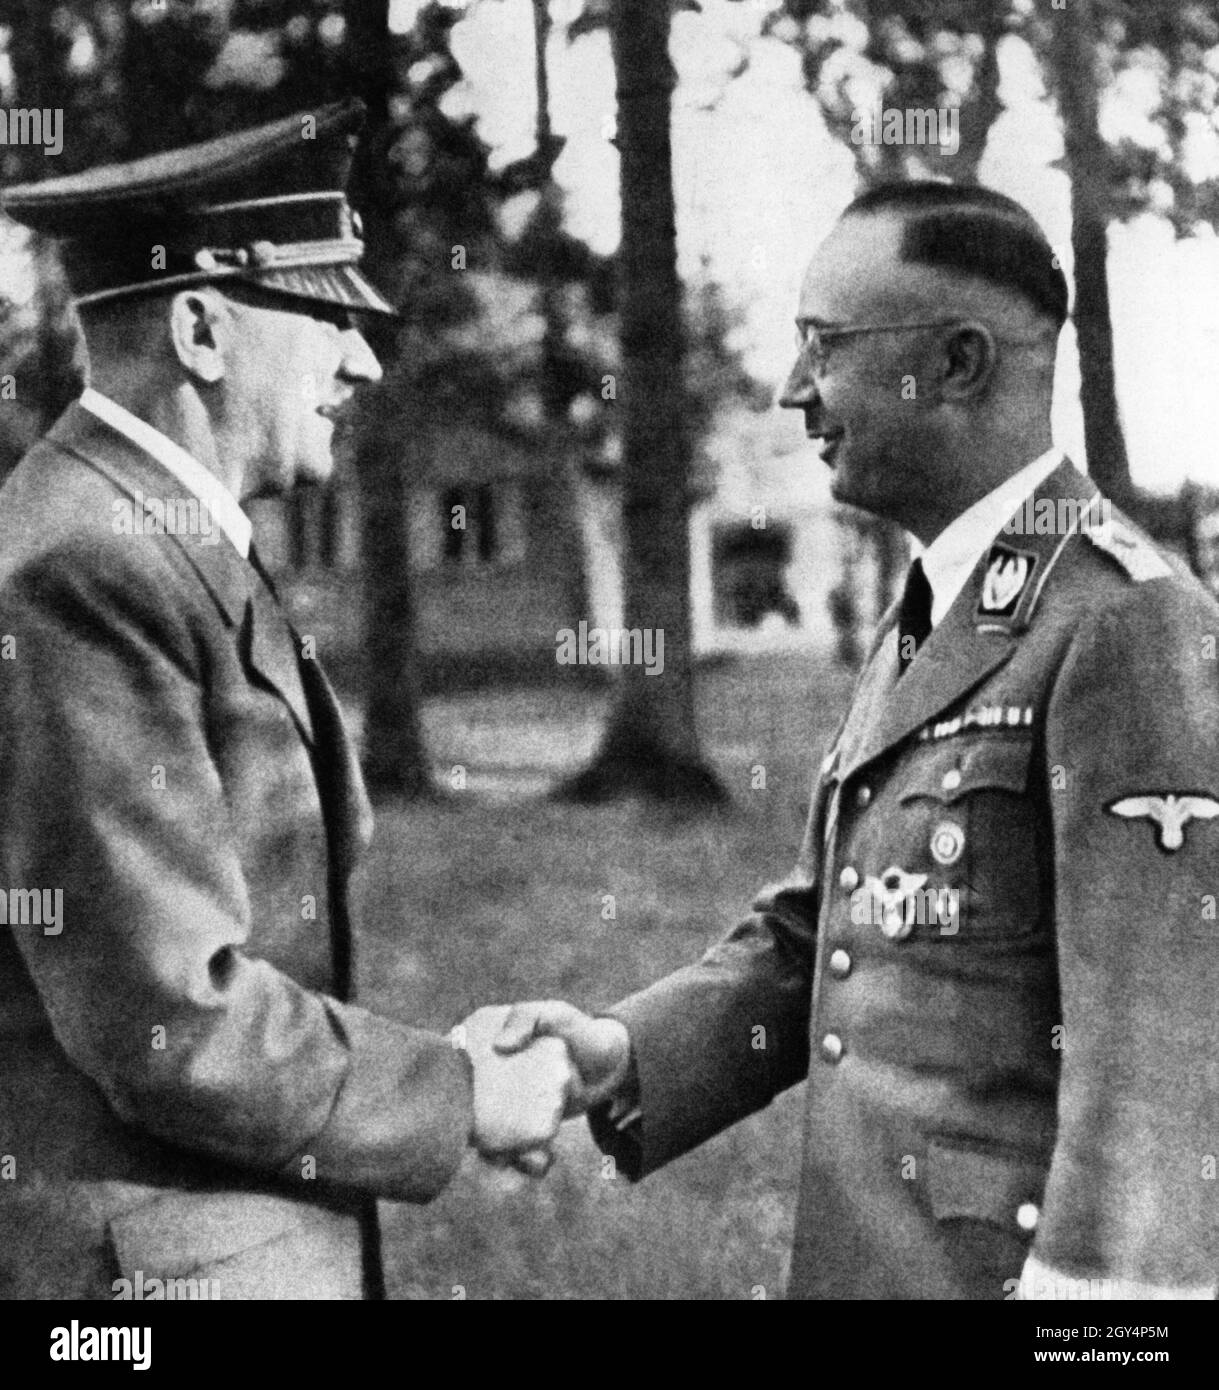 In October 1943, Adolf Hitler welcomes Reichsführer SS Heinrich Himmler to his Wolfsschanze headquarters in East Prussia, where he has ordered all the Gauleiters of the NSDAP to a Führer meeting after the defeat at Stalingrad and the setbacks in Africa. [automated translation] Stock Photo